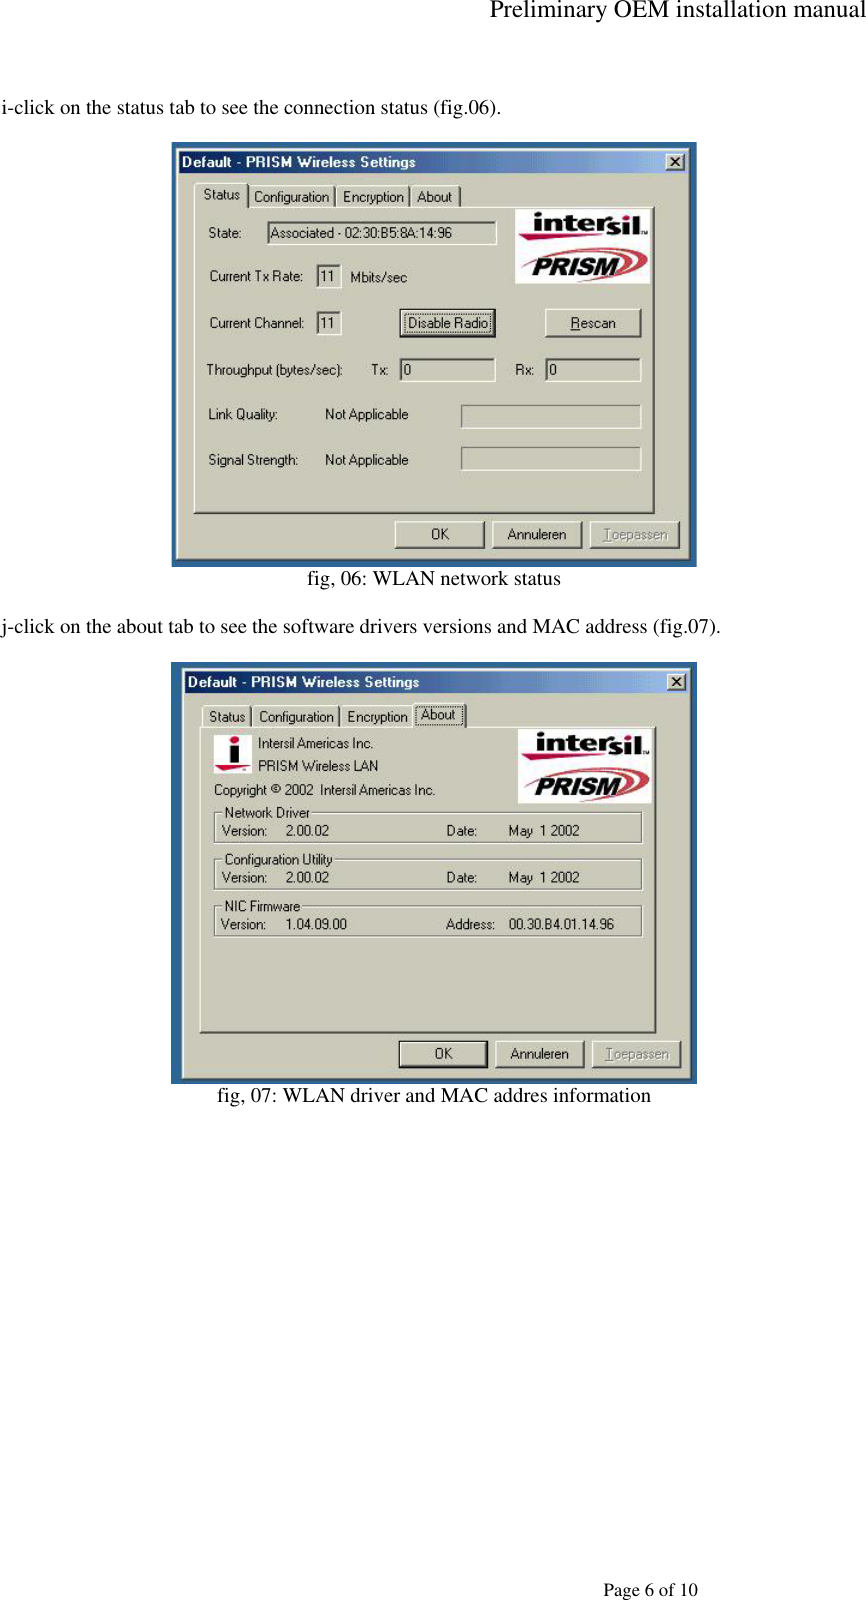 Preliminary OEM installation manual   Page 6 of 10  i-click on the status tab to see the connection status (fig.06).   fig, 06: WLAN network status  j-click on the about tab to see the software drivers versions and MAC address (fig.07).   fig, 07: WLAN driver and MAC addres information  